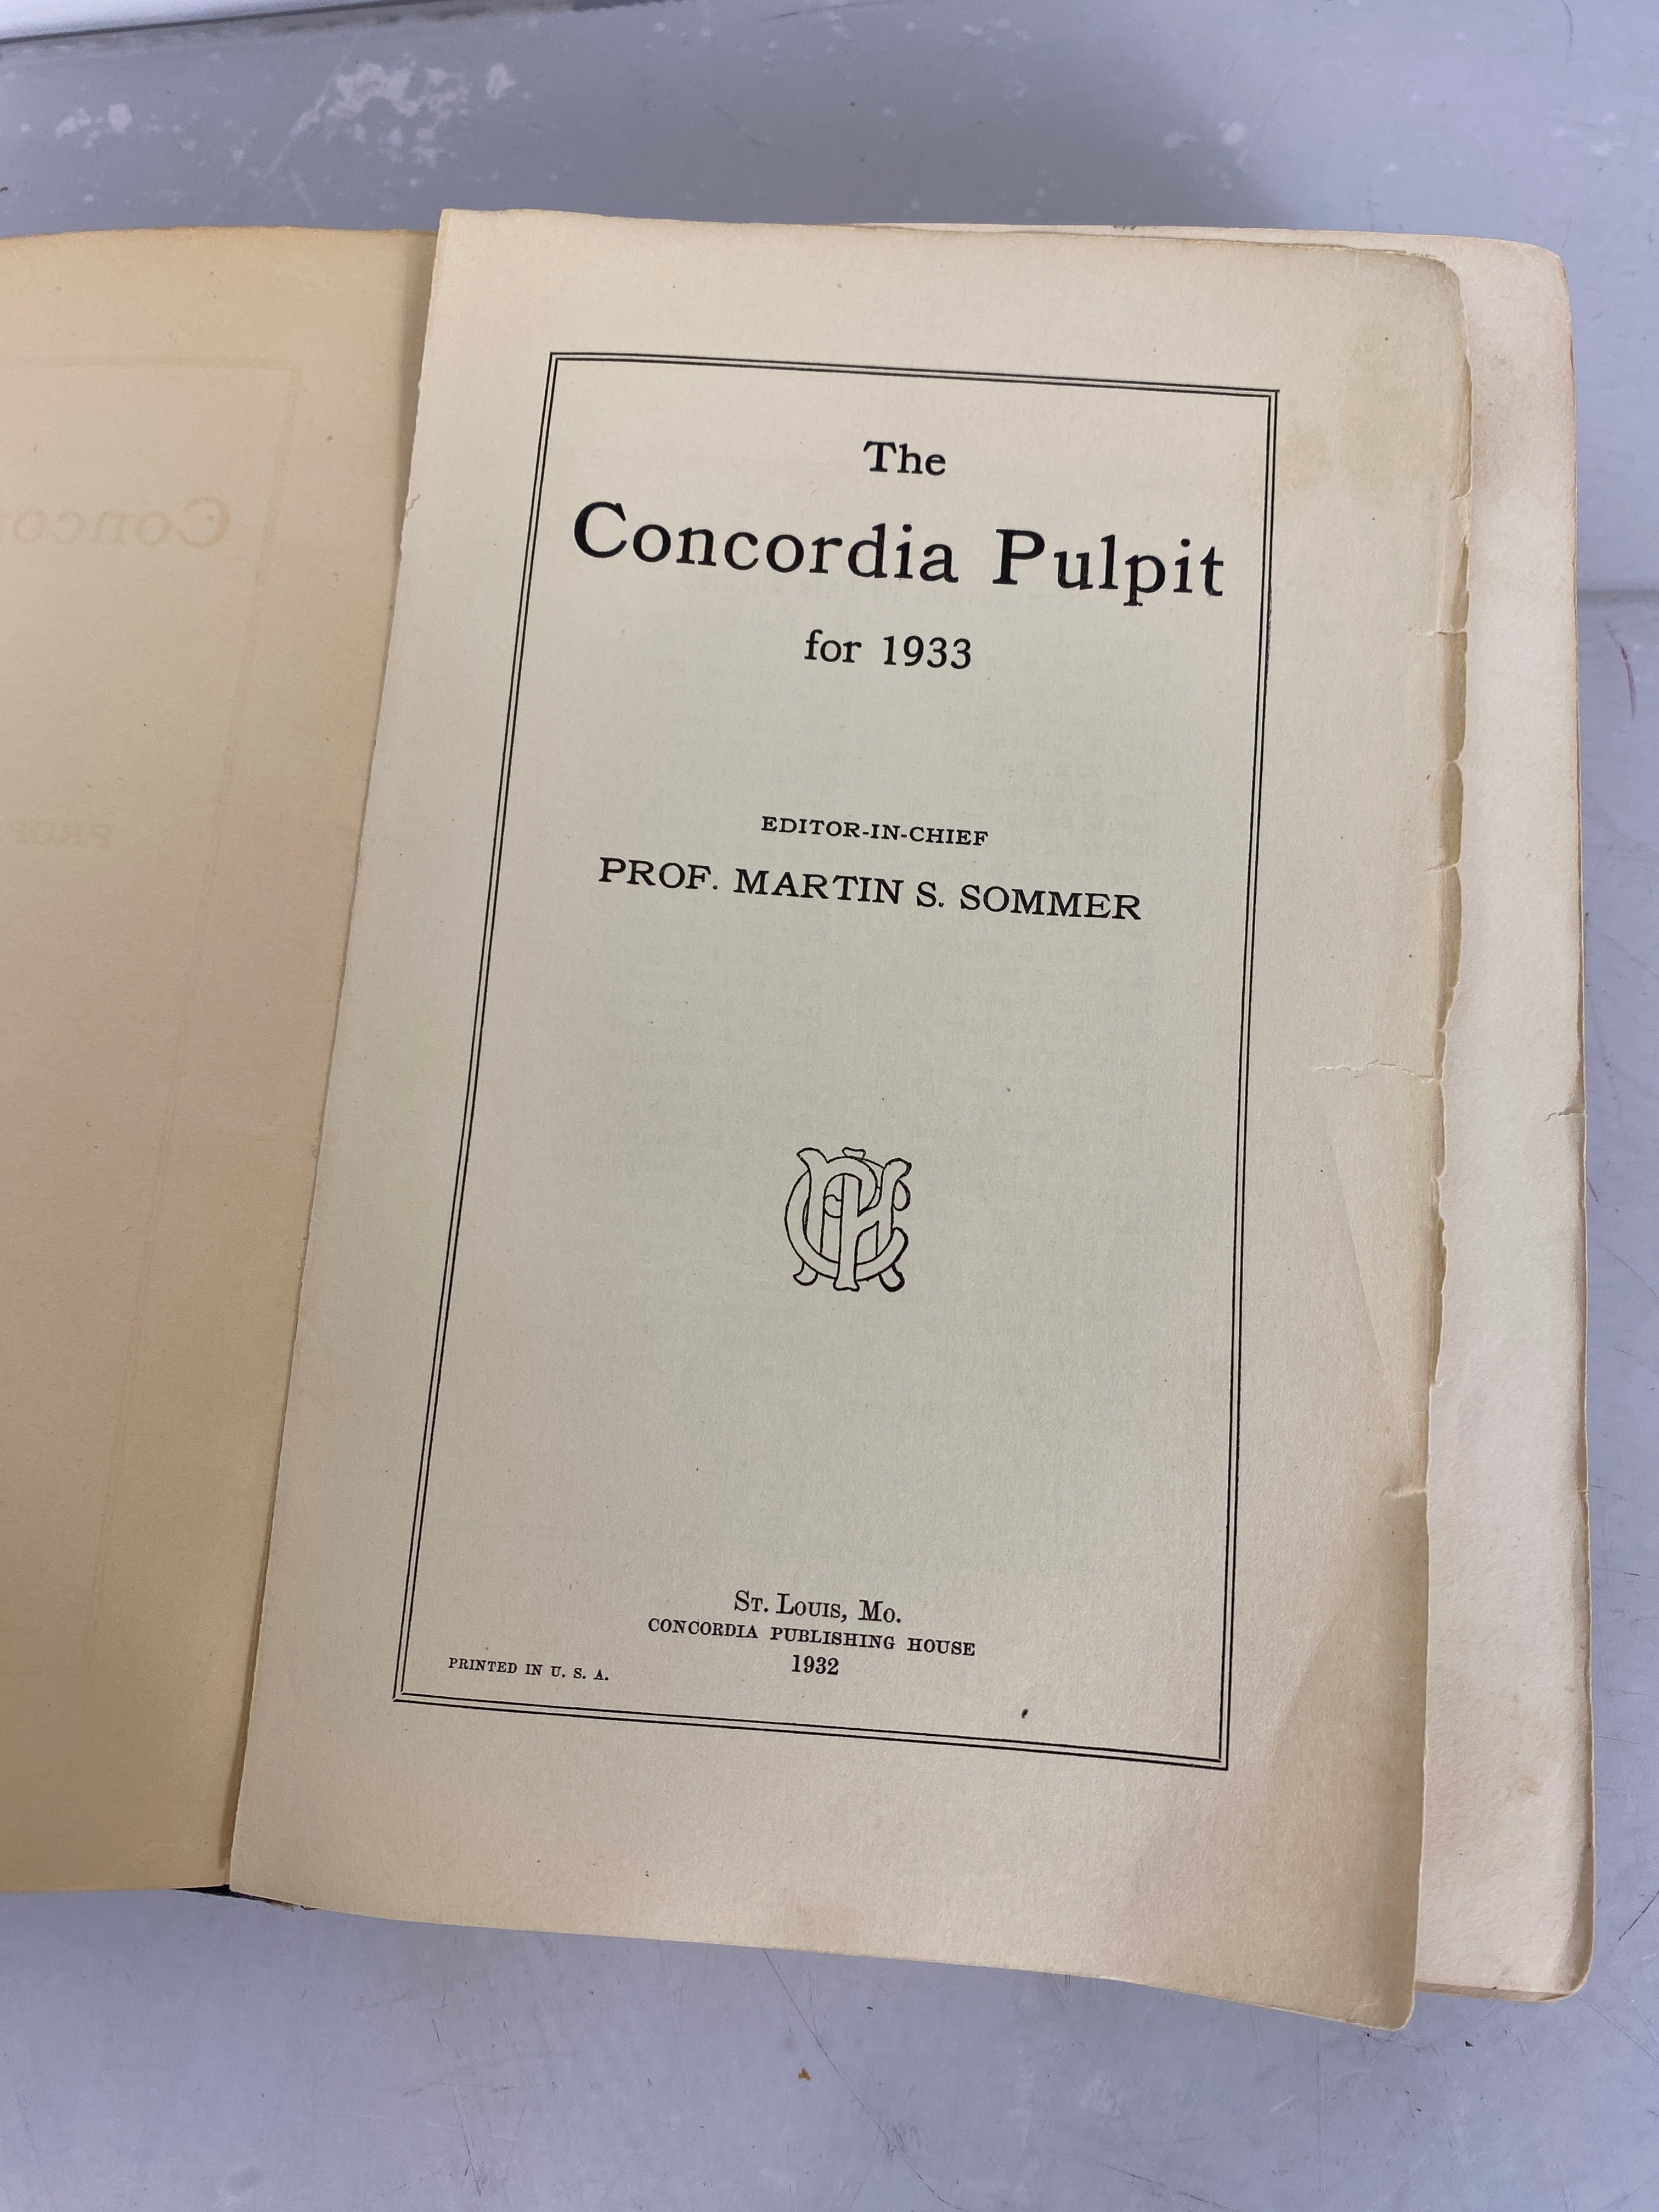 Lot of 2 The Concordia Pulpit for 1933 and 1948 Volume HC